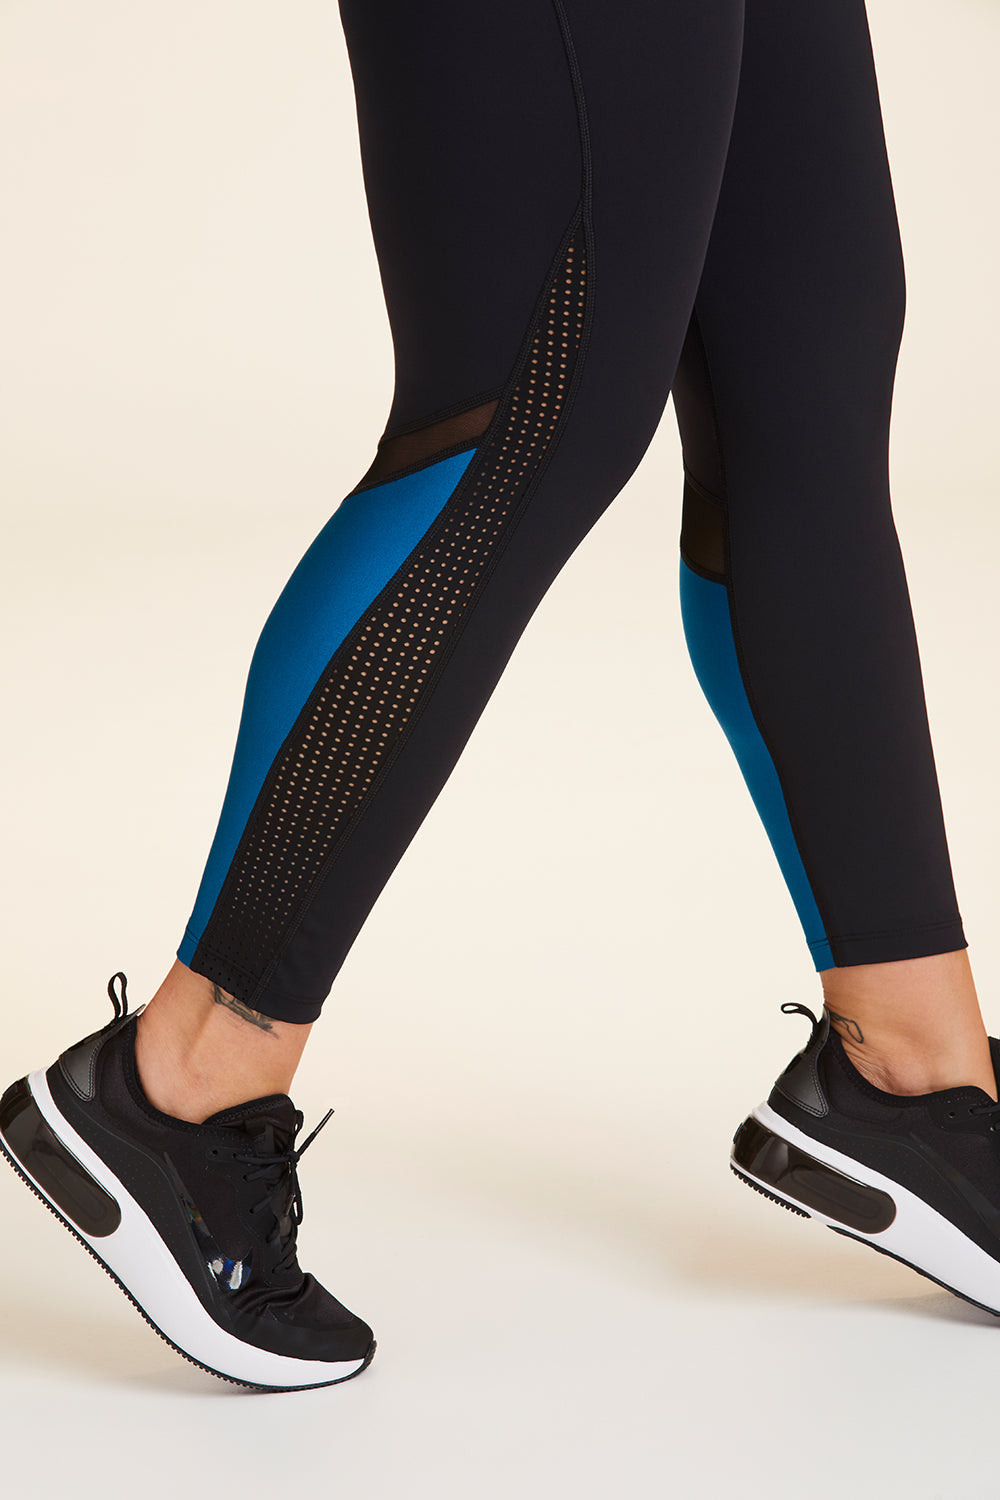 Side view close-up of Alala Women's Luxury Athleisure black and teal 7/8 tight with minimal mesh detail in plus size